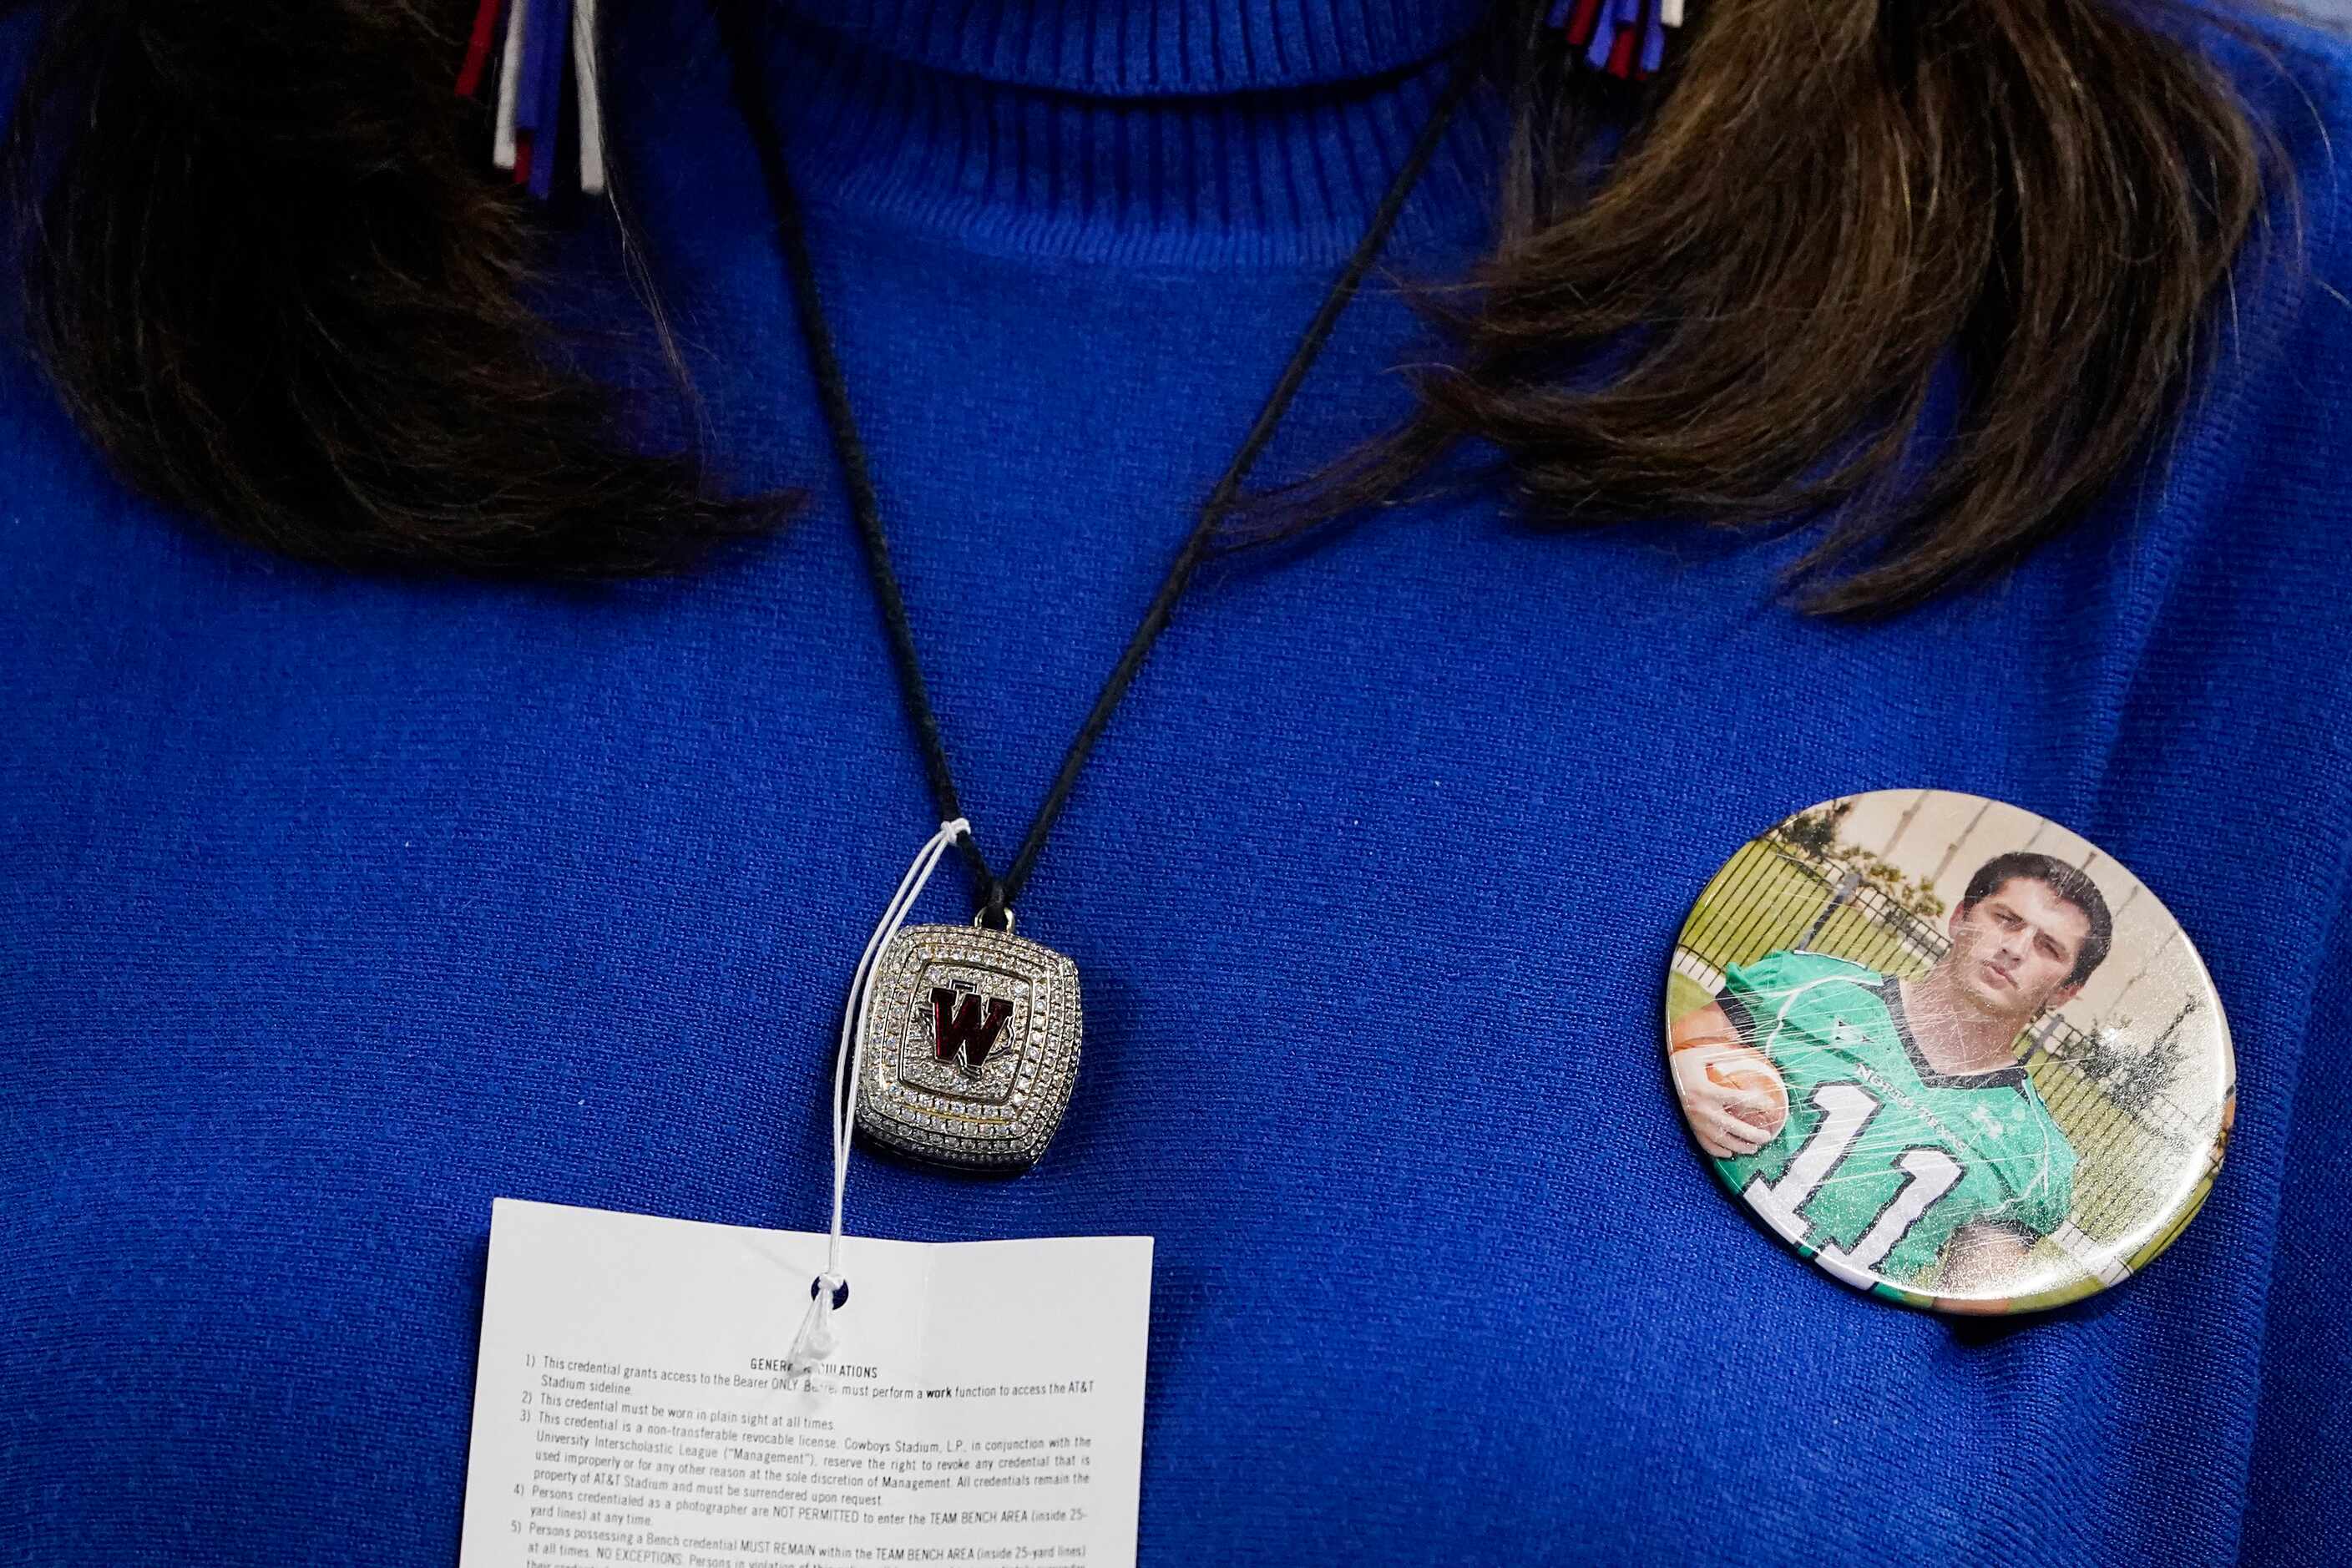 Elizabeth Dodge wears a Westlake pendant and the team colors colors, but also sports a...